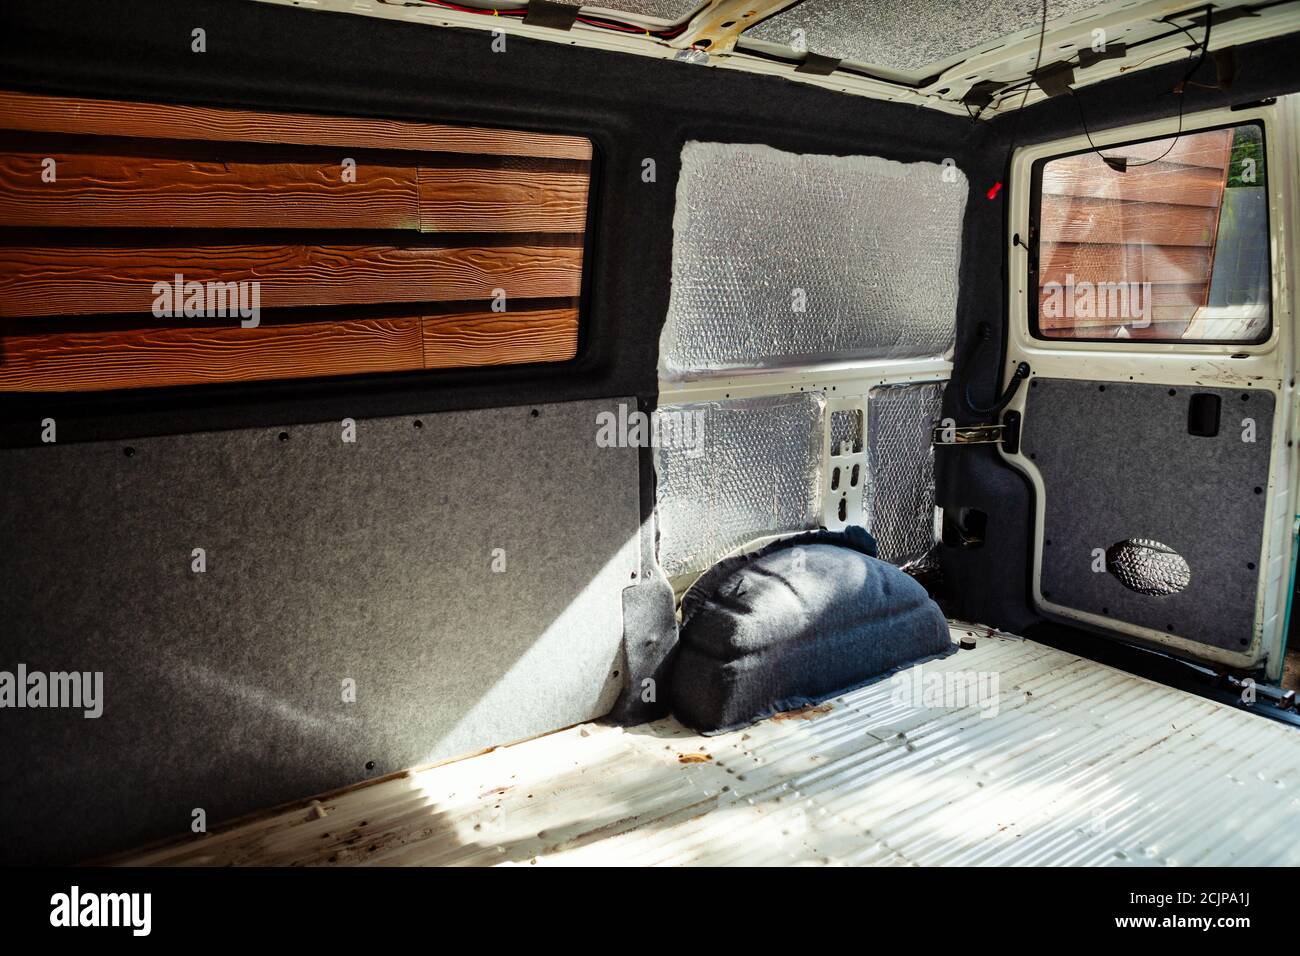 Conversion of a t4 van into a camper van.. Carpeting has been added to the metalwork and some of the carpeted panels have been added Stock Photo